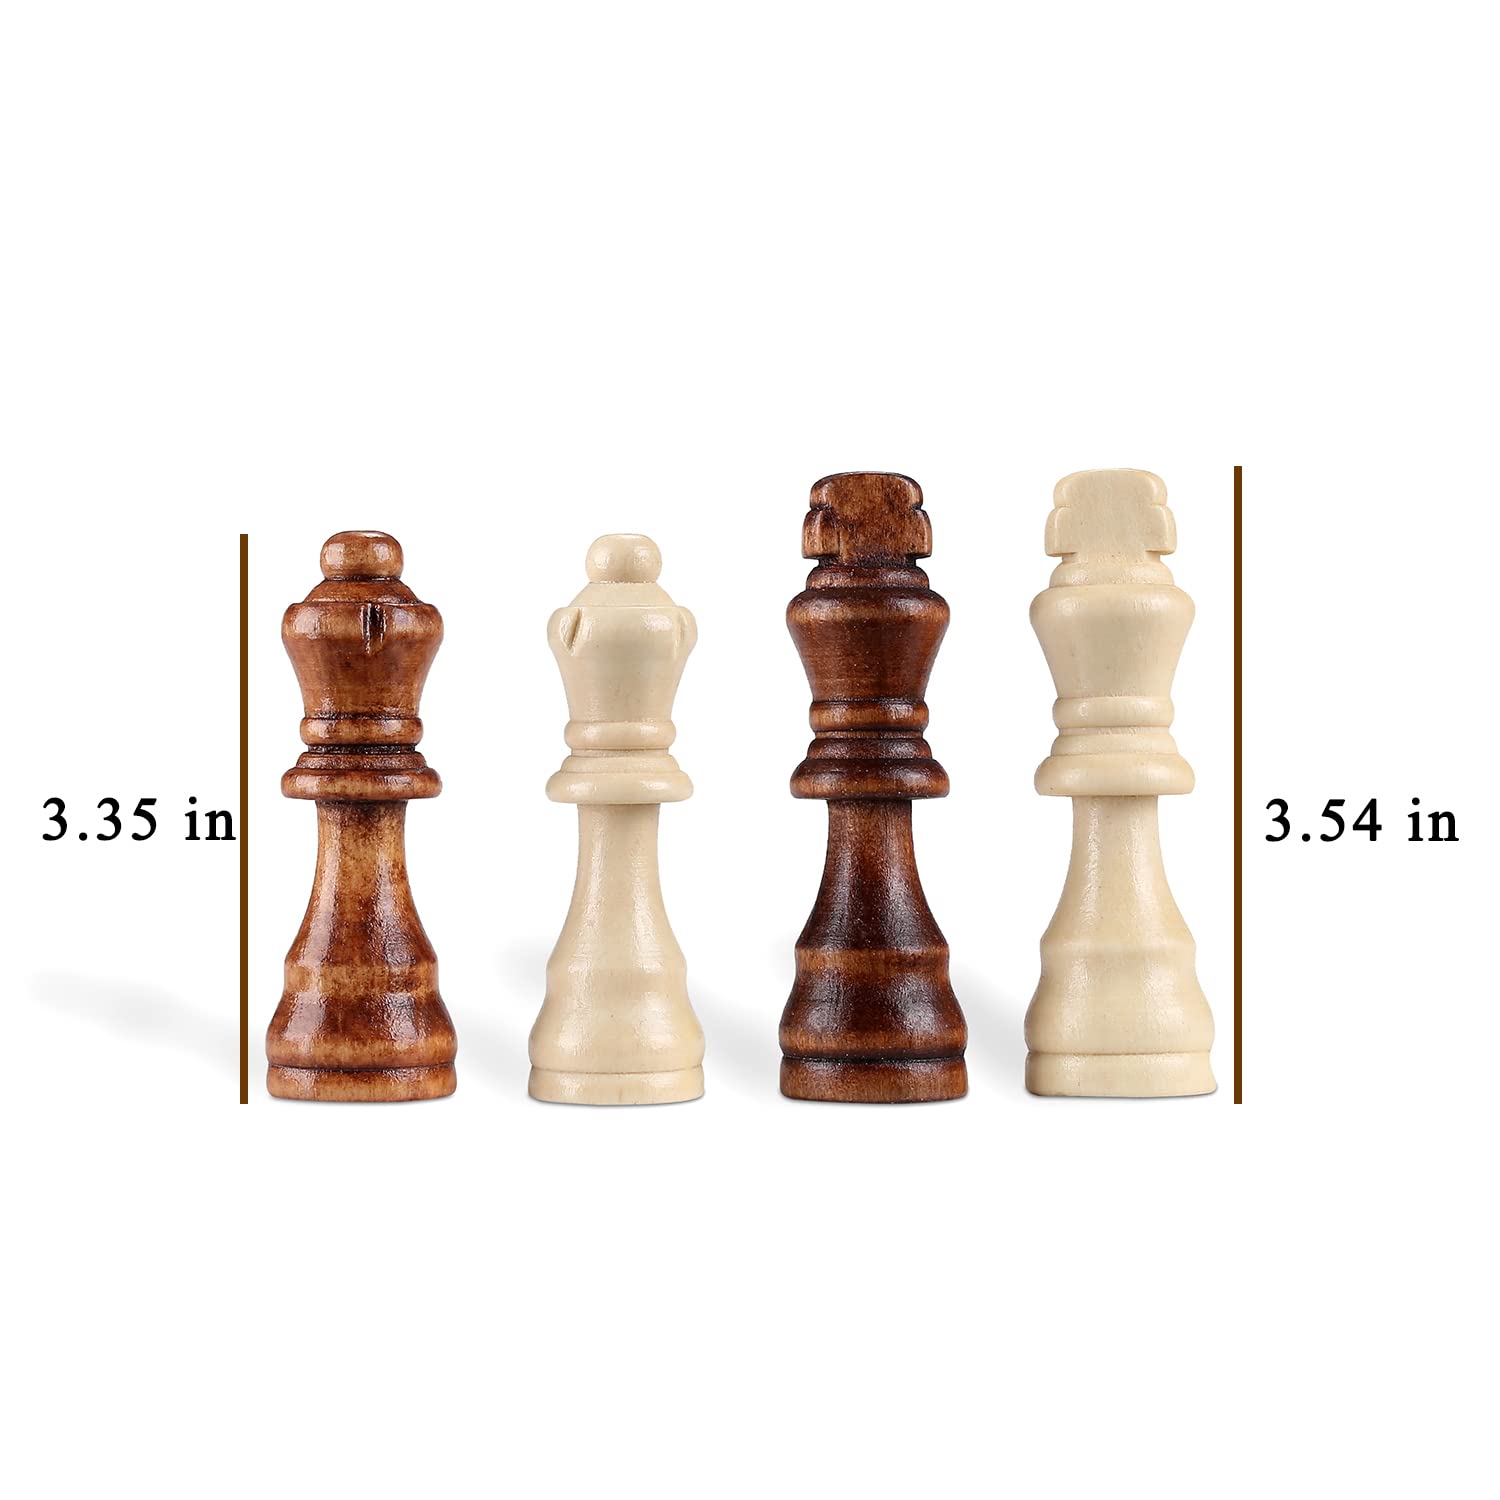 YB-OSANA 62 Pieces Wooden Checker Pieces & Chess Pieces 2 in 1 Chess Game Set Board Games Accessories Classic Wooden Chess Game Set in 2 Styles and 2 Colors